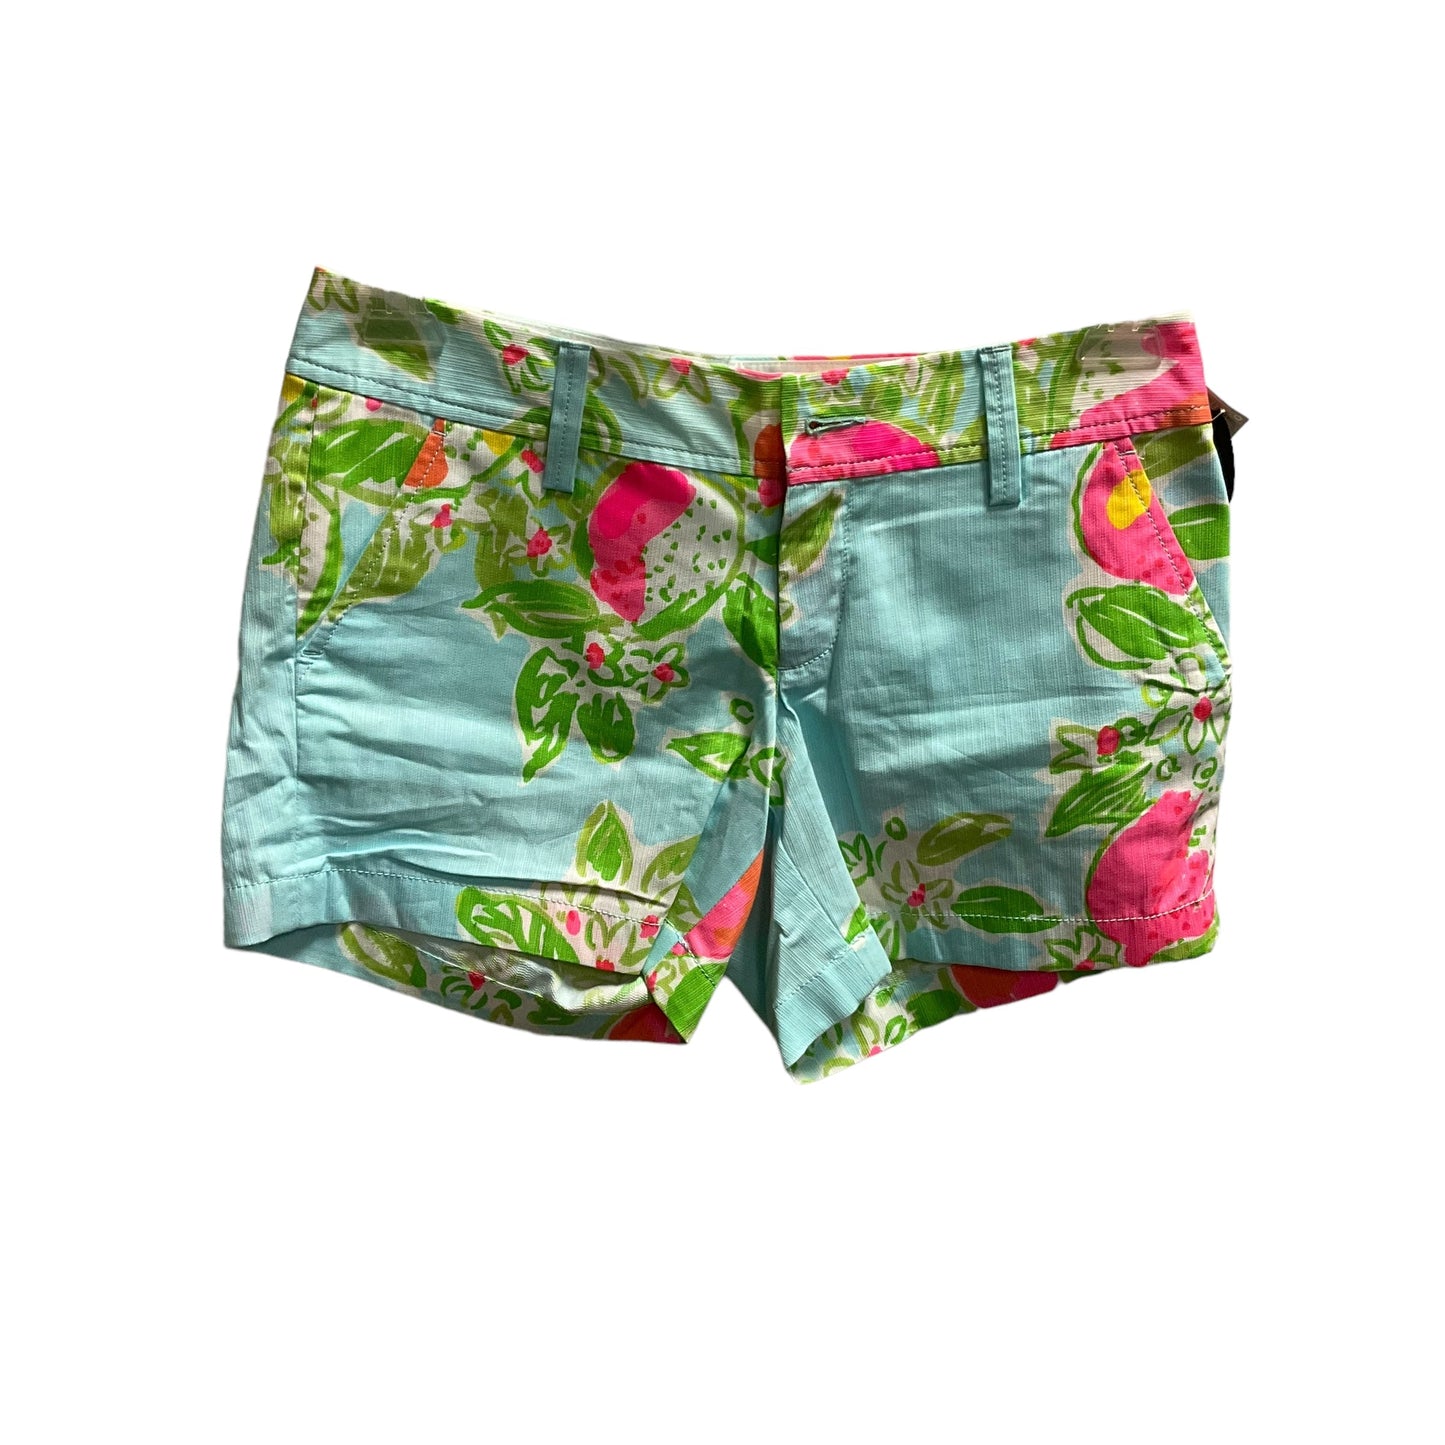 Floral Print Shorts Lilly Pulitzer, Size 2